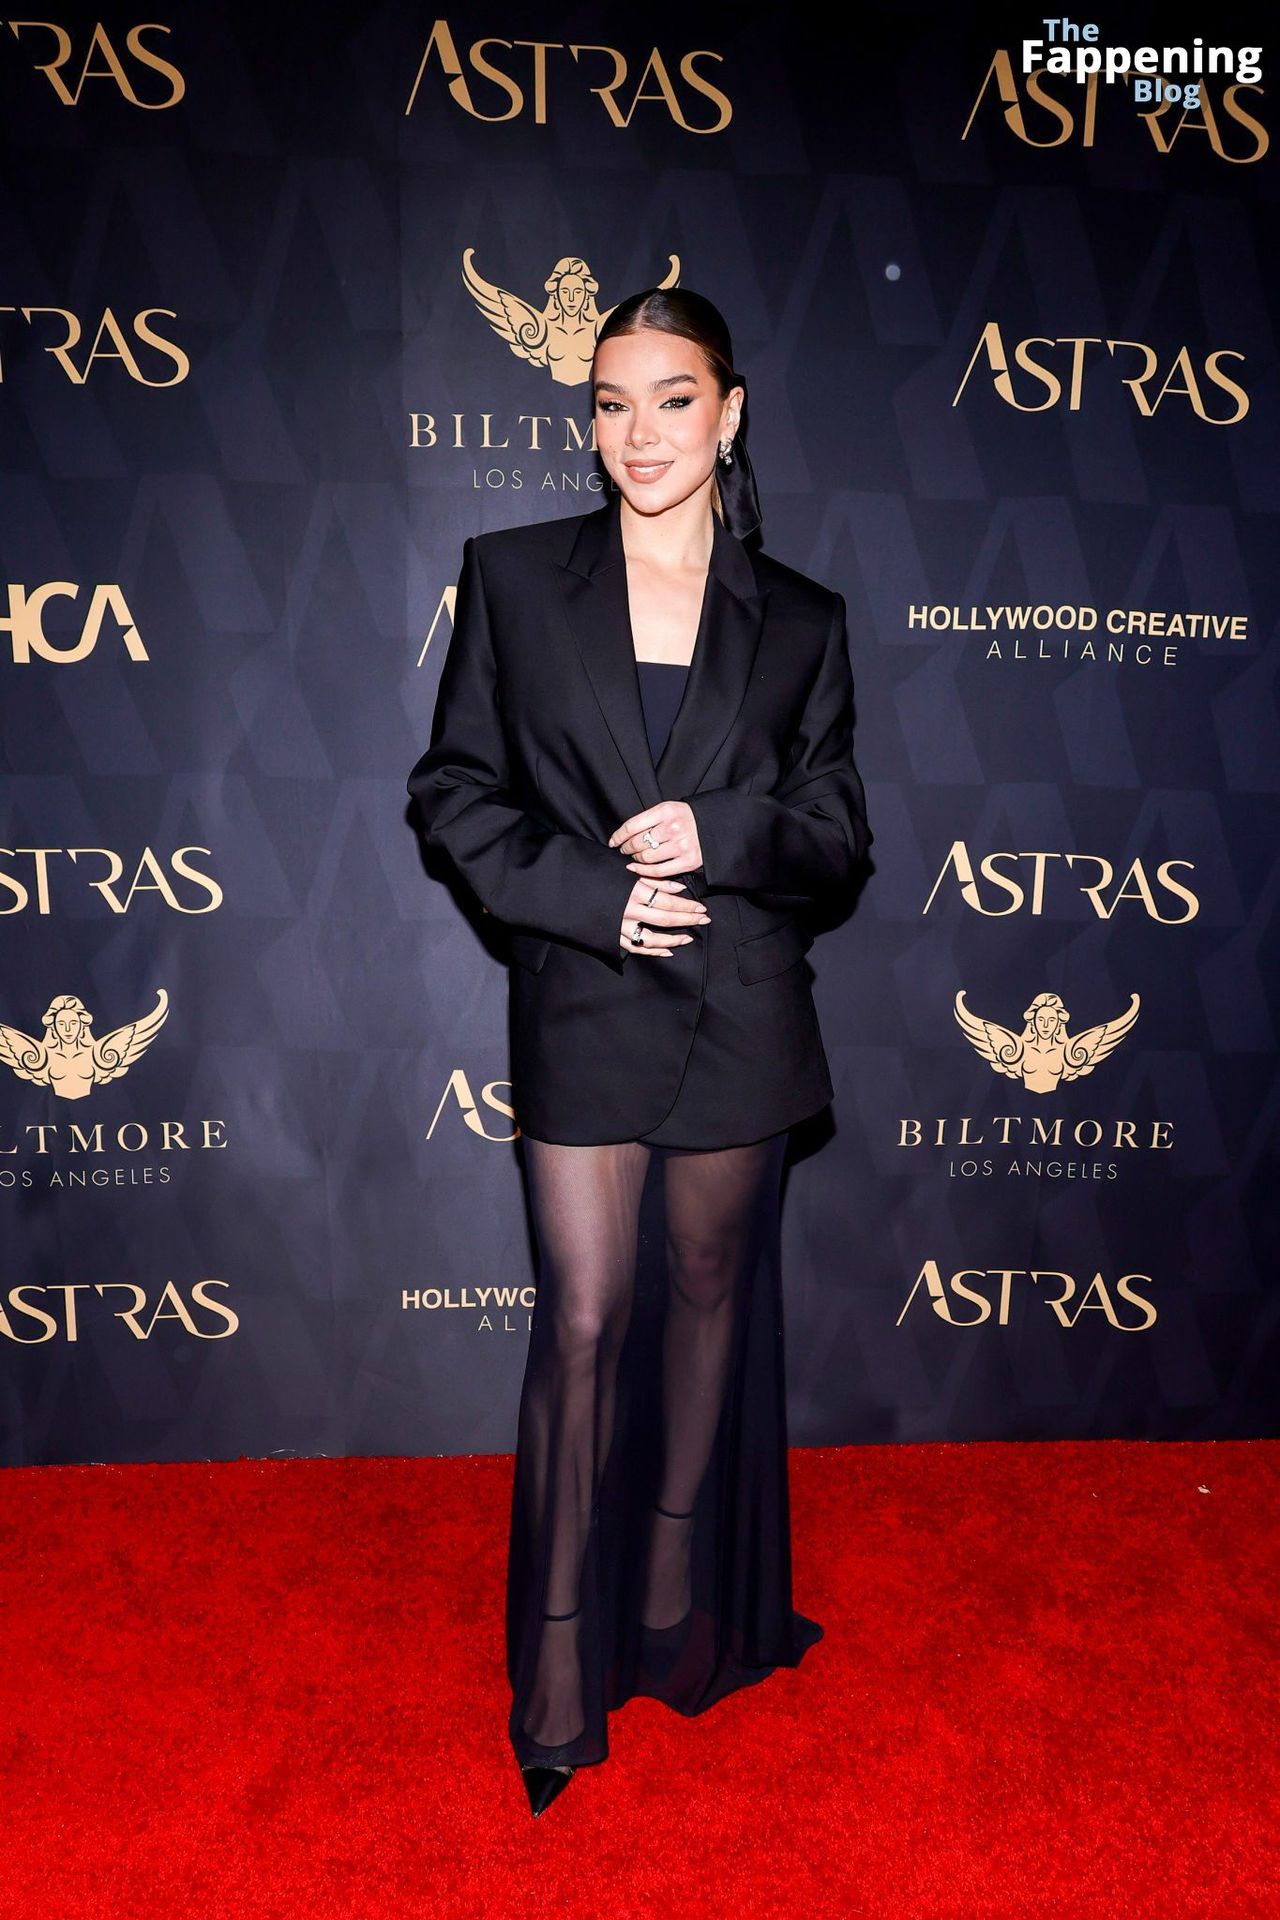 Hailee-Steinfeld-Black-Outfit-Astra-Film-Awards-8-thefappeningblog.com_.jpg